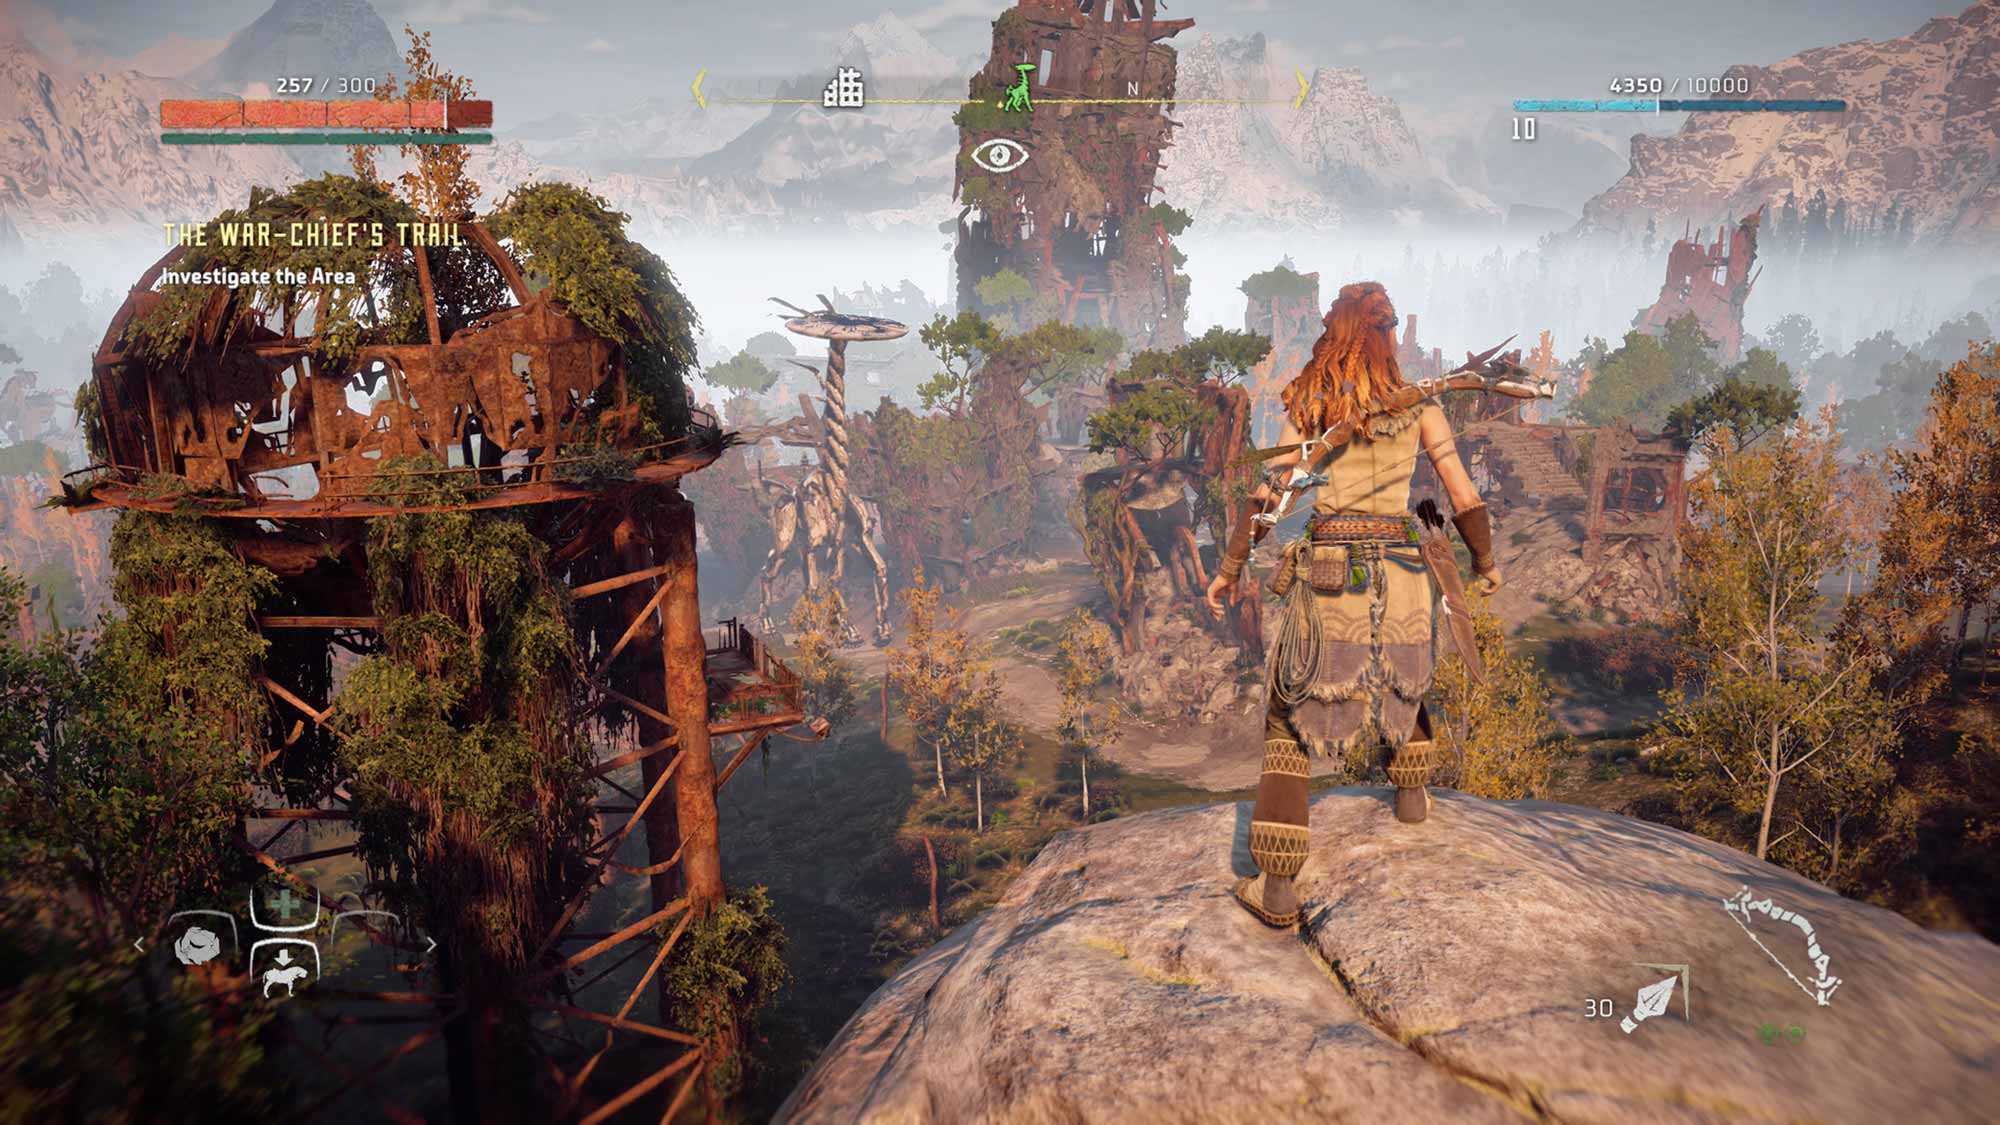 Horizon Zero Dawn Features One Of Gaming S Most Fascinating And Original Worlds